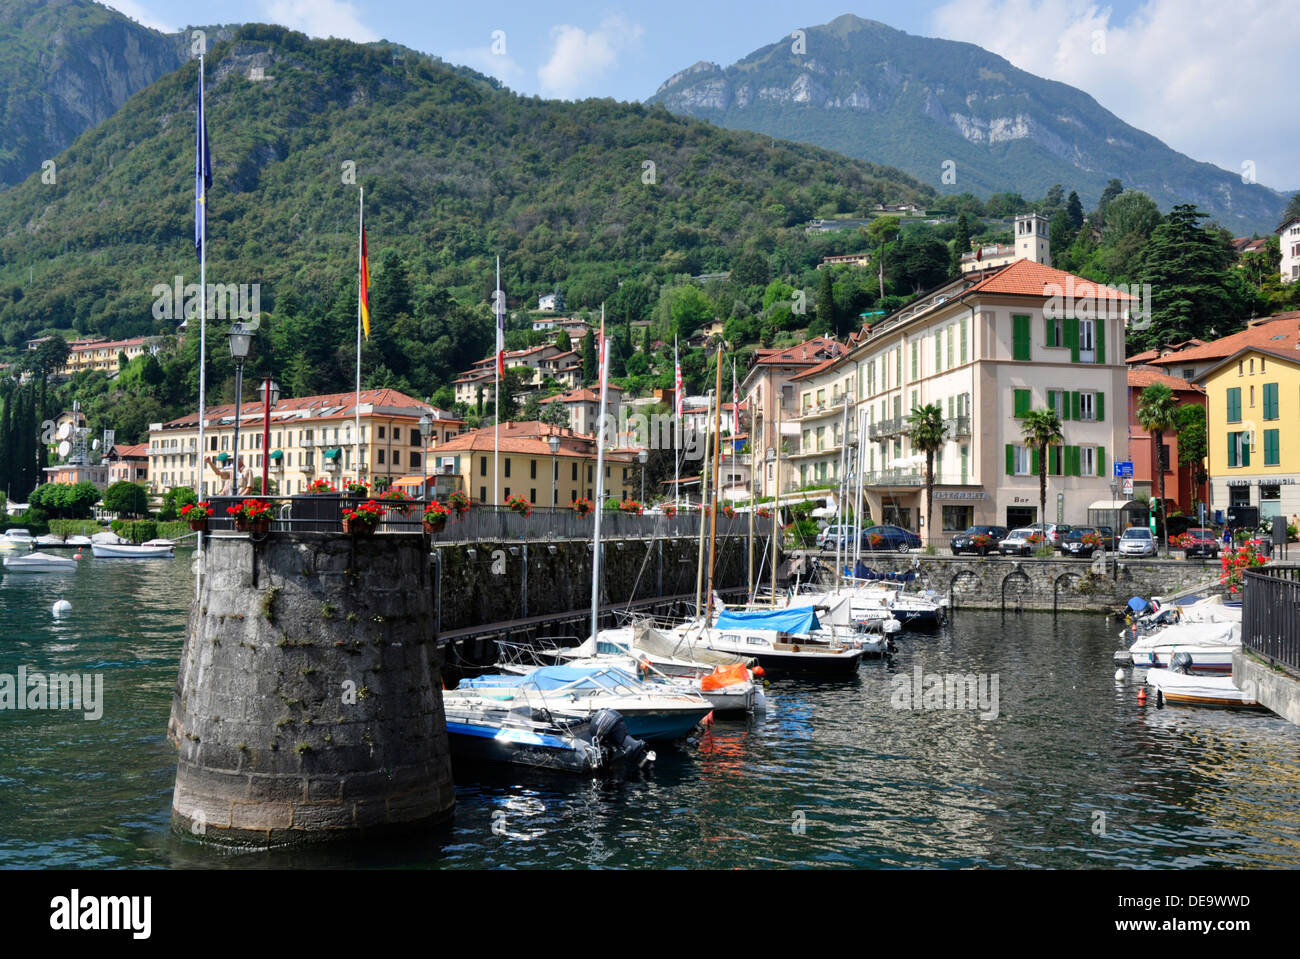 Italy - Lake Como - Menaggio - the harbour - moored yachts - flowers - backdrop town + mountains - sunlight + blue sky Stock Photo